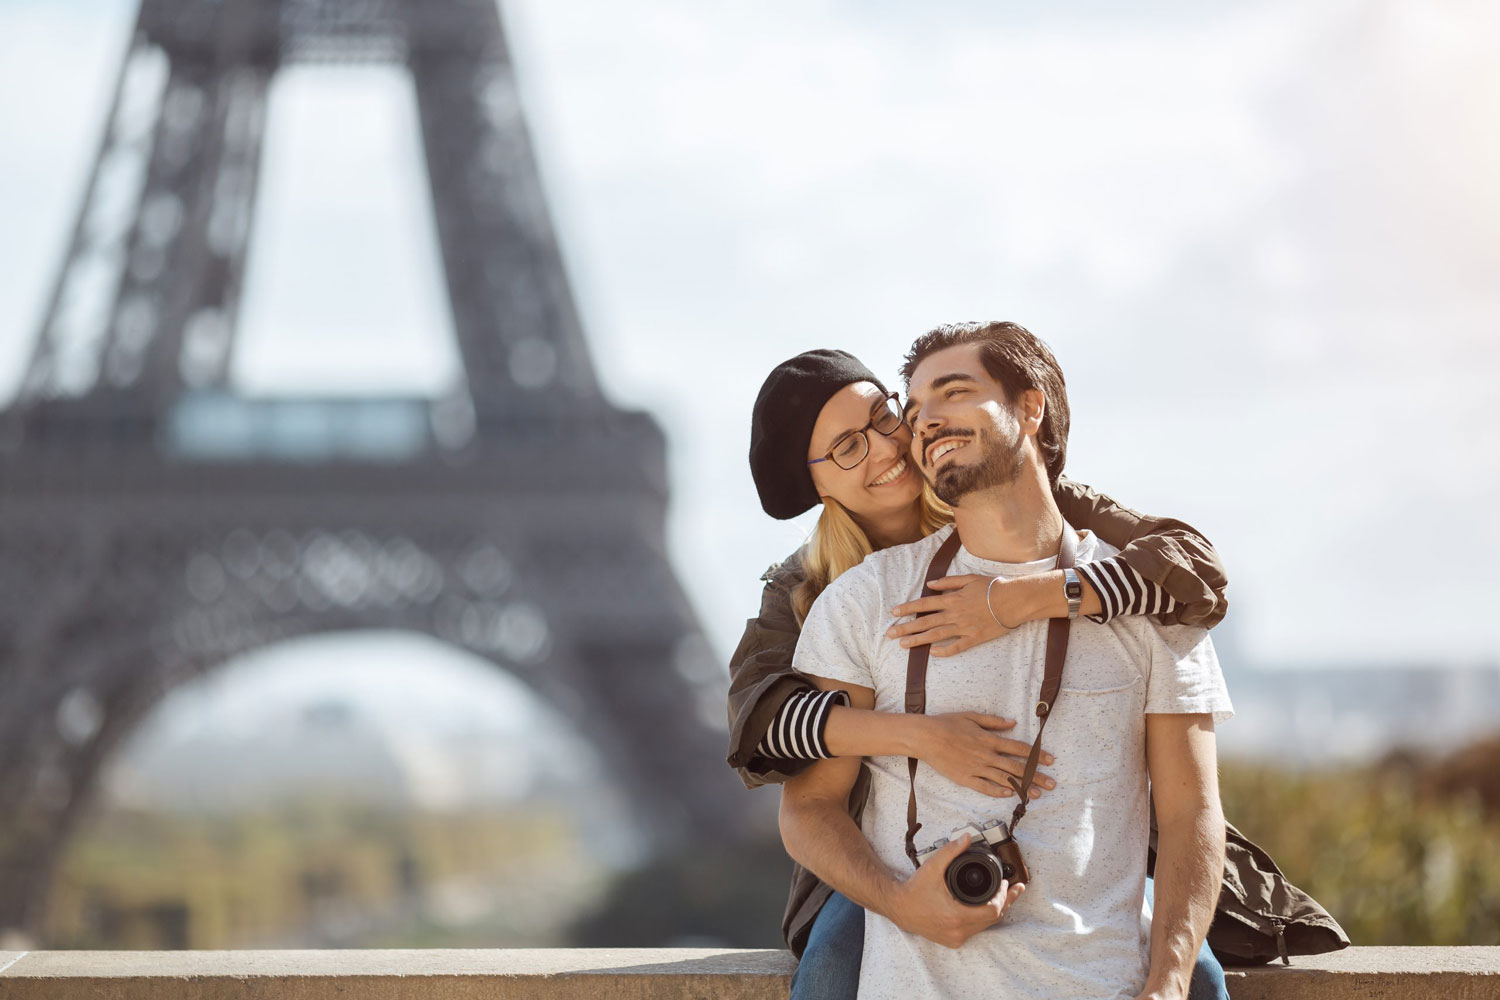 Benefits Of Dating In Paris vs. Everywhere Else, According To An Australian Woman